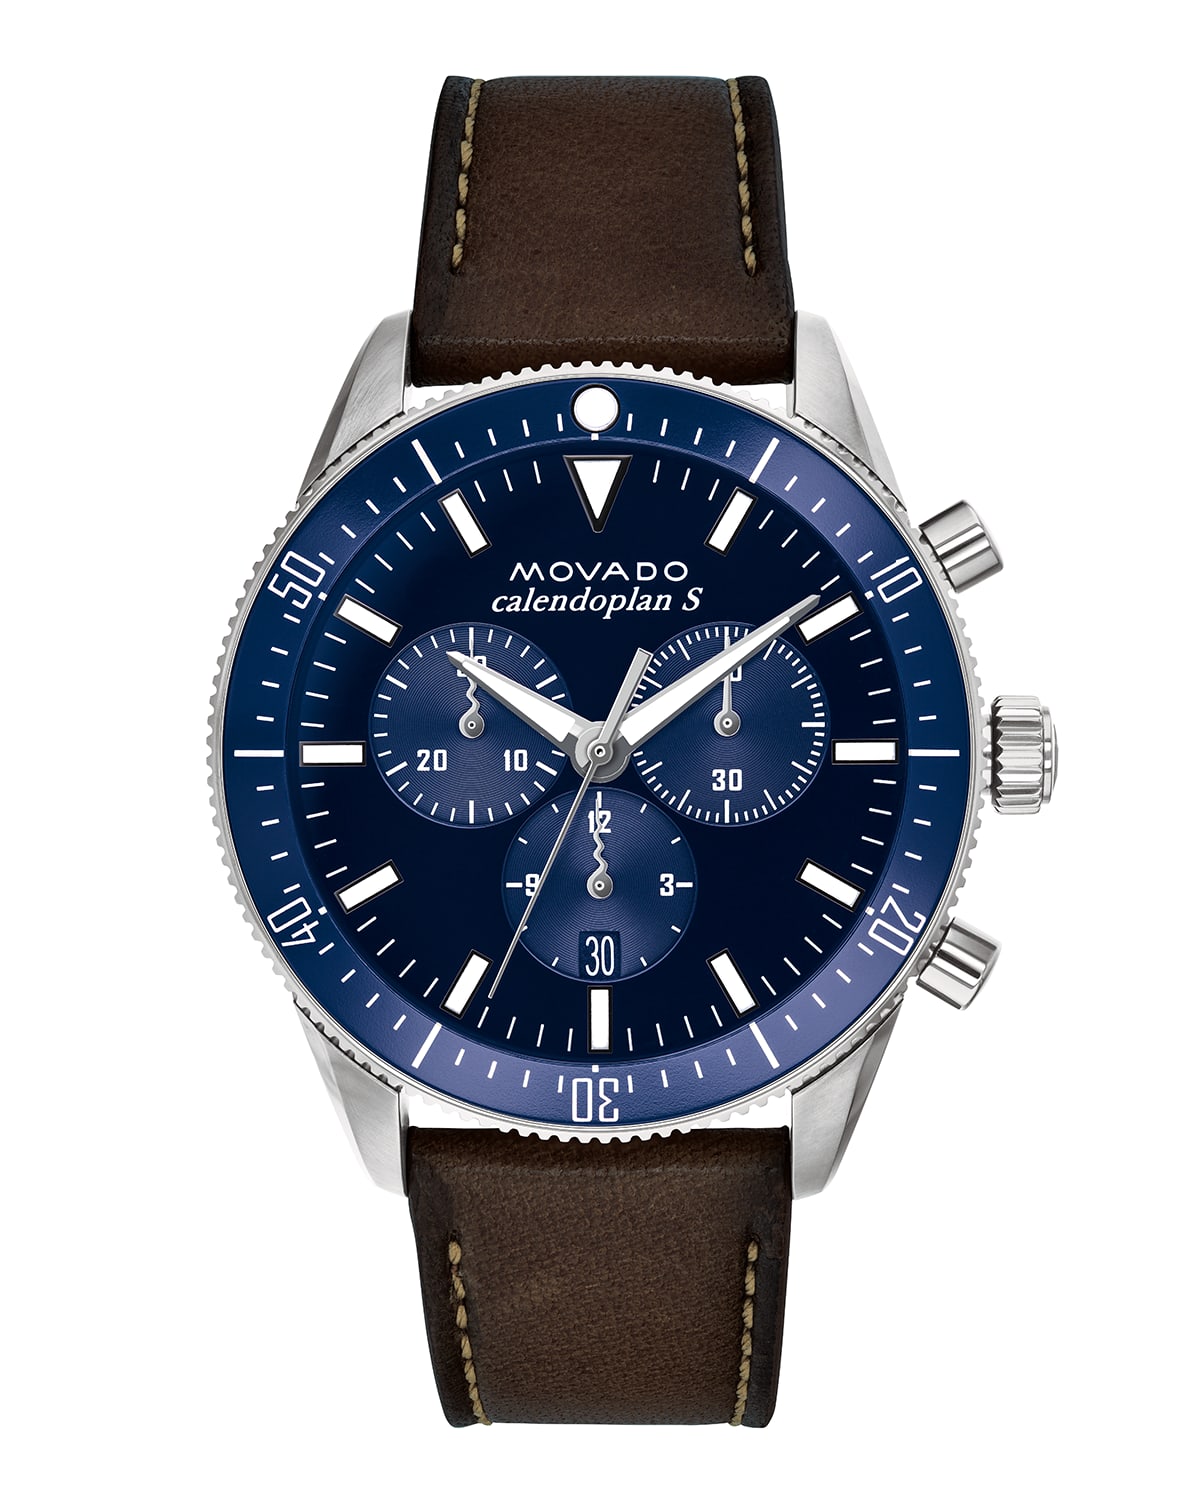 Movado Men's Diver Chronograph Watch With Leather Strap & Blue Dial